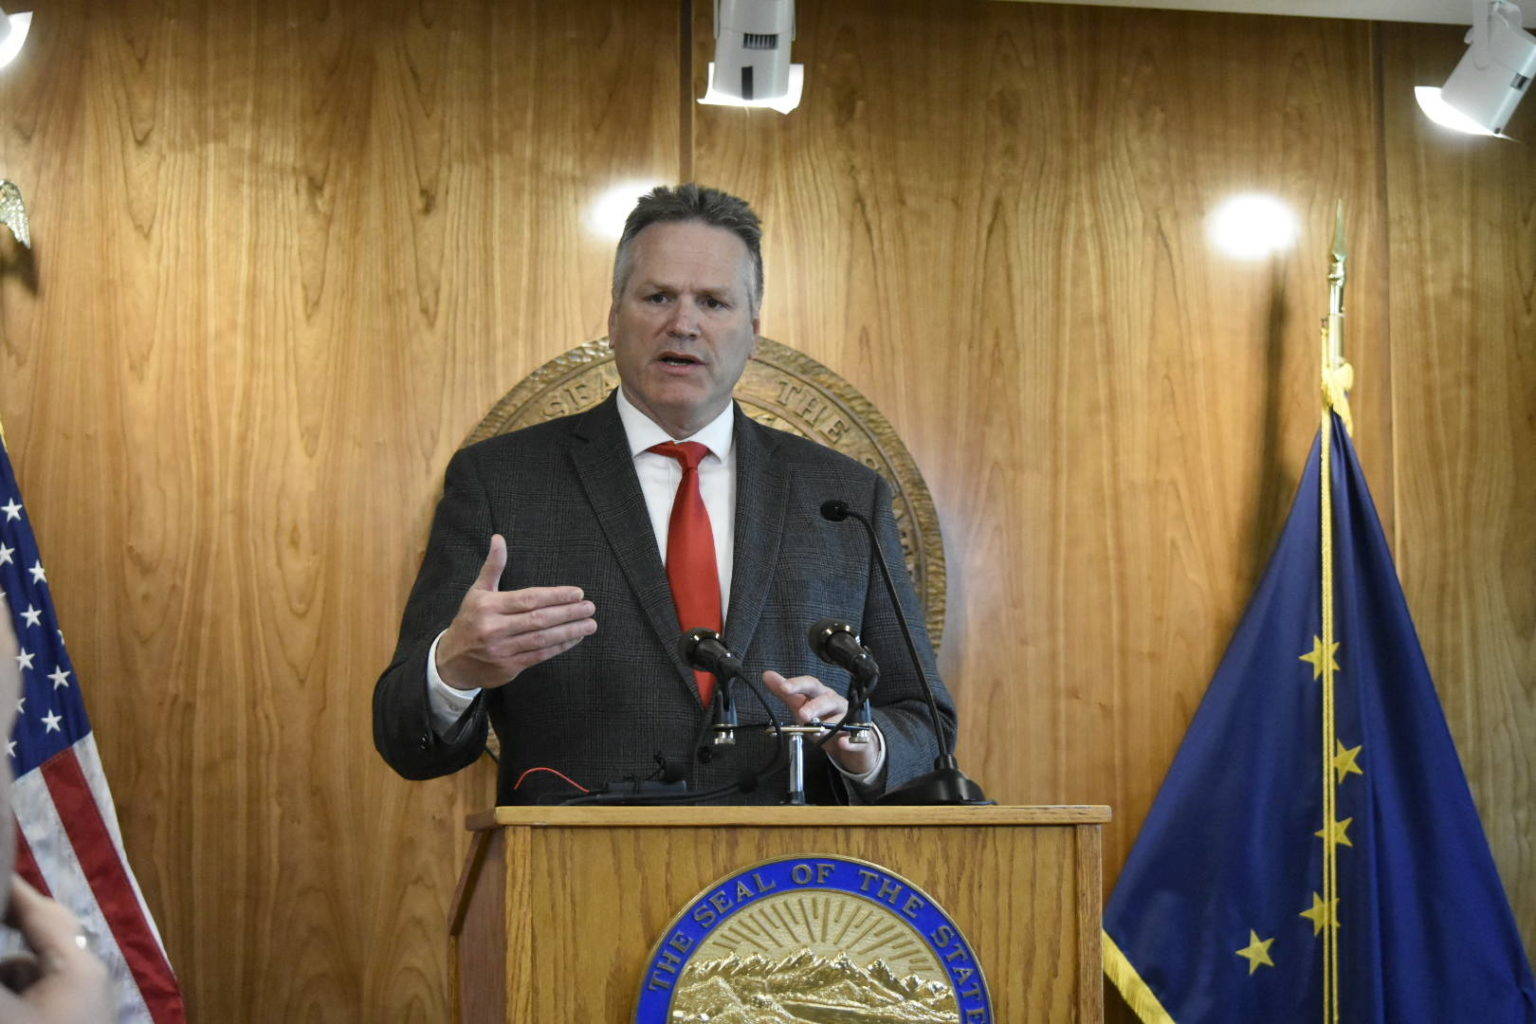 Gov. Mike Dunleavy, seen here speaking at a Jun 17, 2021 news conference at the Alaska State Capitol, announced $215 million in vetoes to the state budget Thursday, and called on lawmakers to come together to solve the state’s fiscal issues. (Peter Segall / Juneau Empire File)